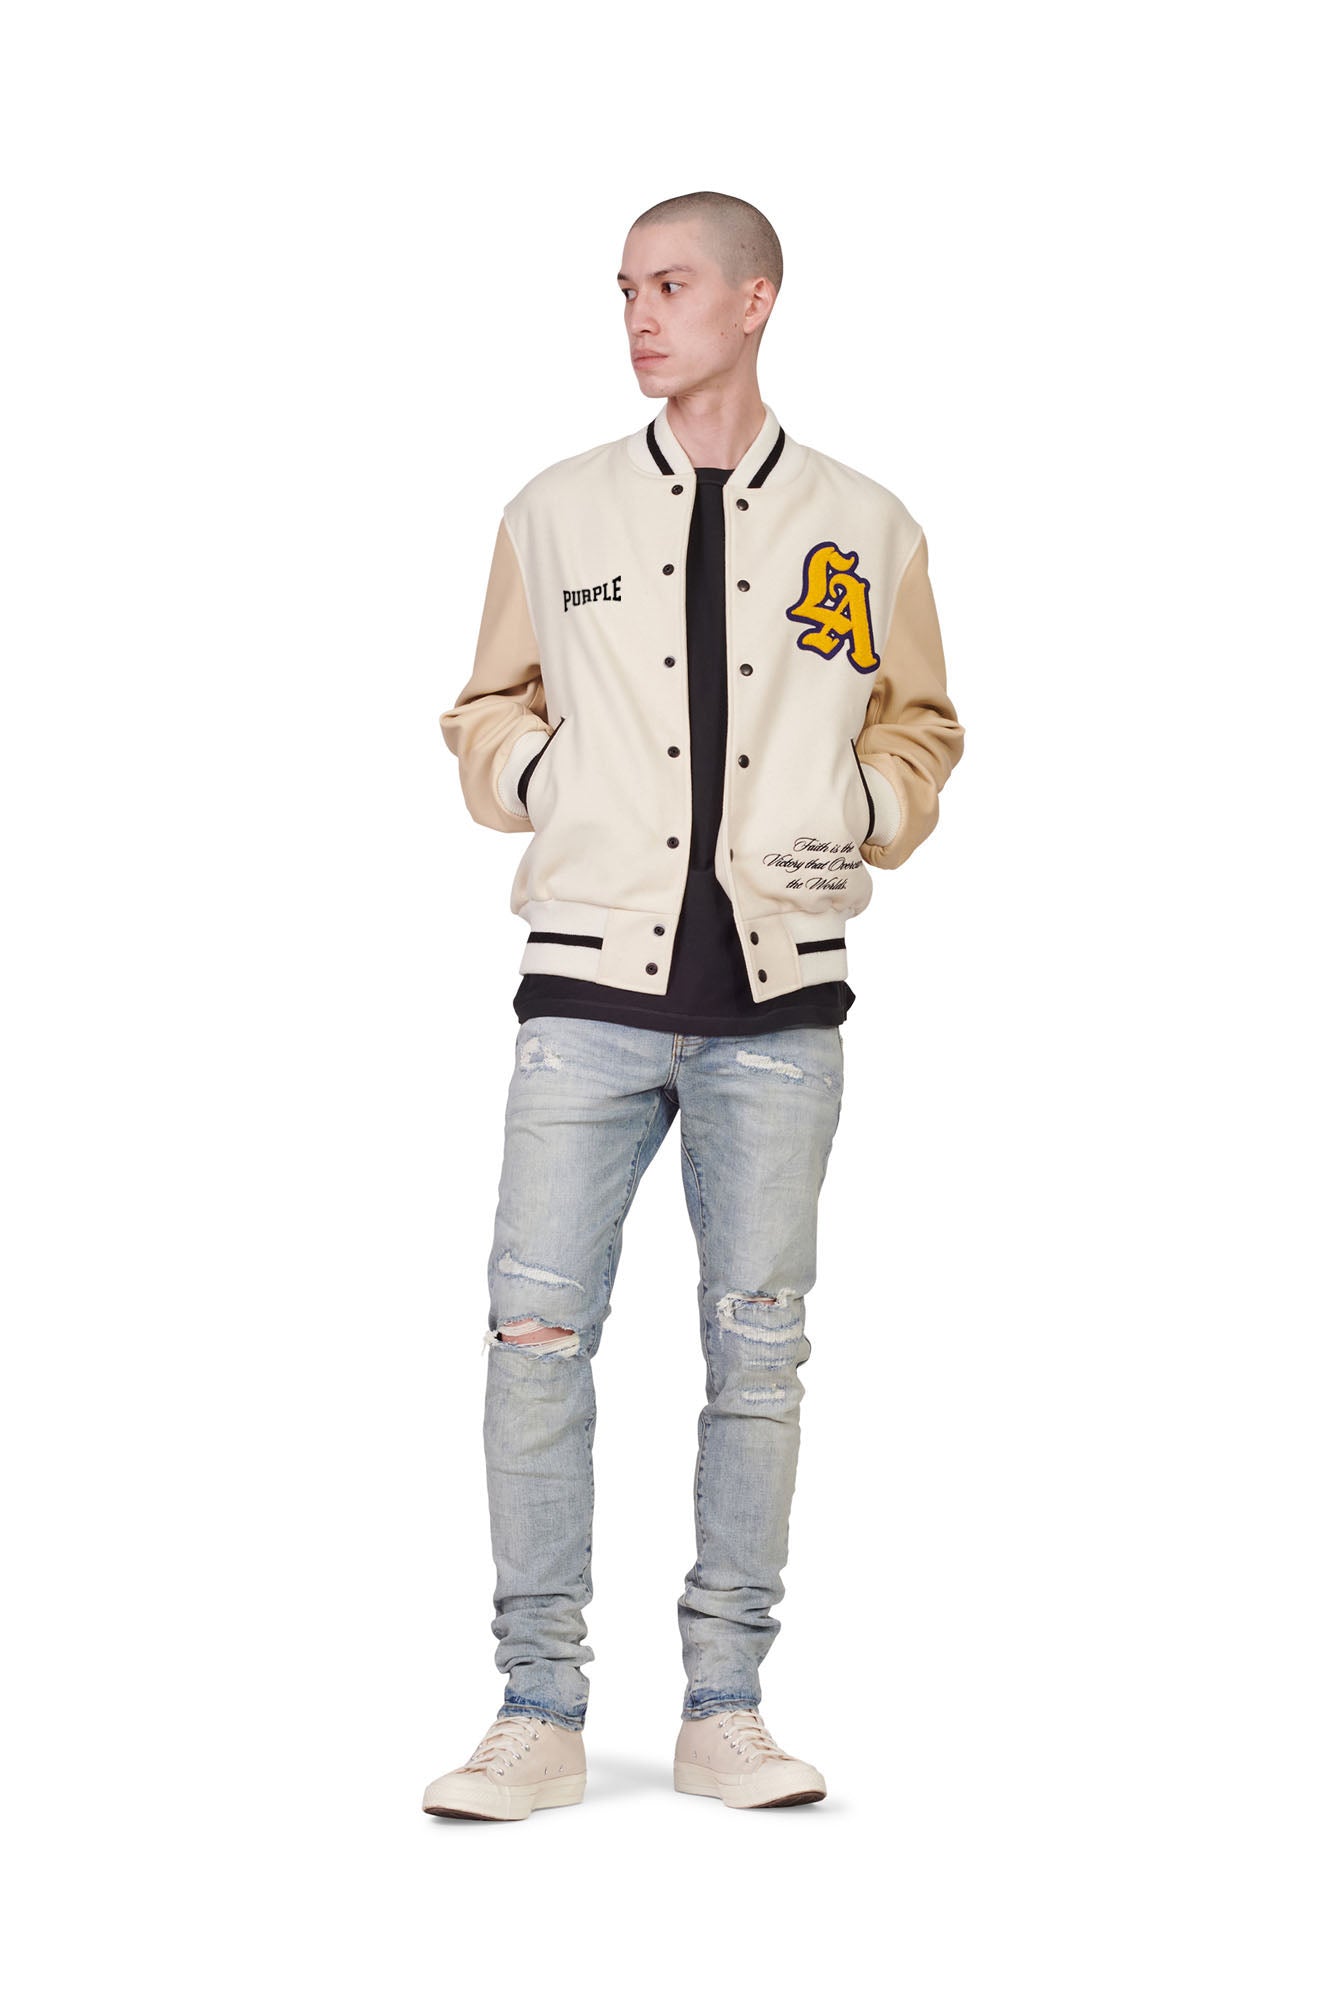 PURPLE BRAND - Men's Letterman Jacket - Style No. P320 - Golden Bear White and Gold - Model Styled Pose